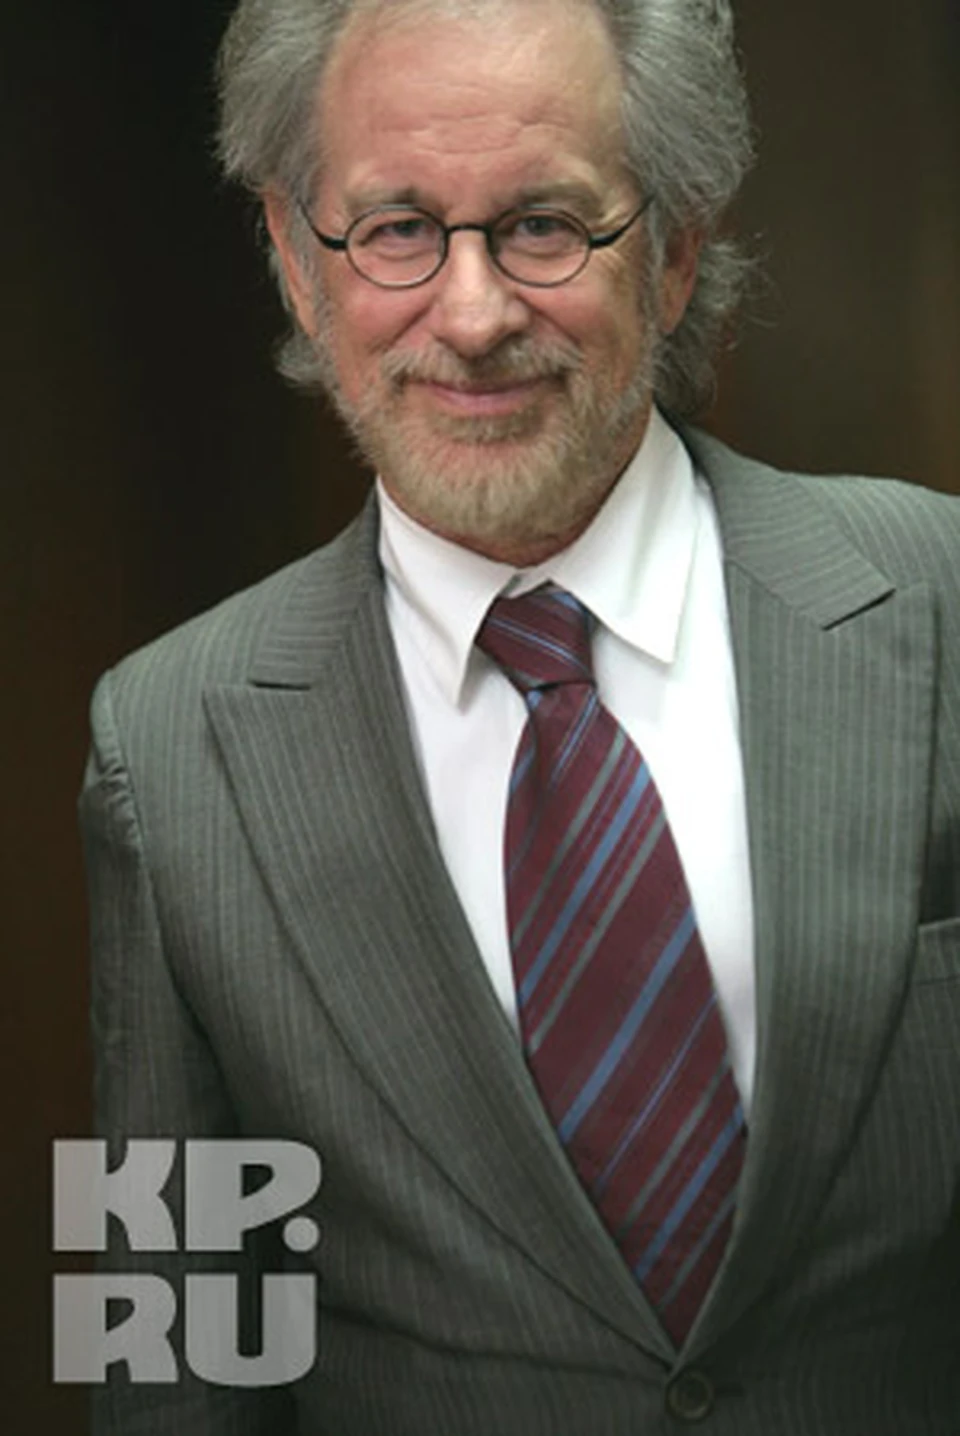 Steven Spielberg: "I'm Russian. But that doesn't explain a thing."